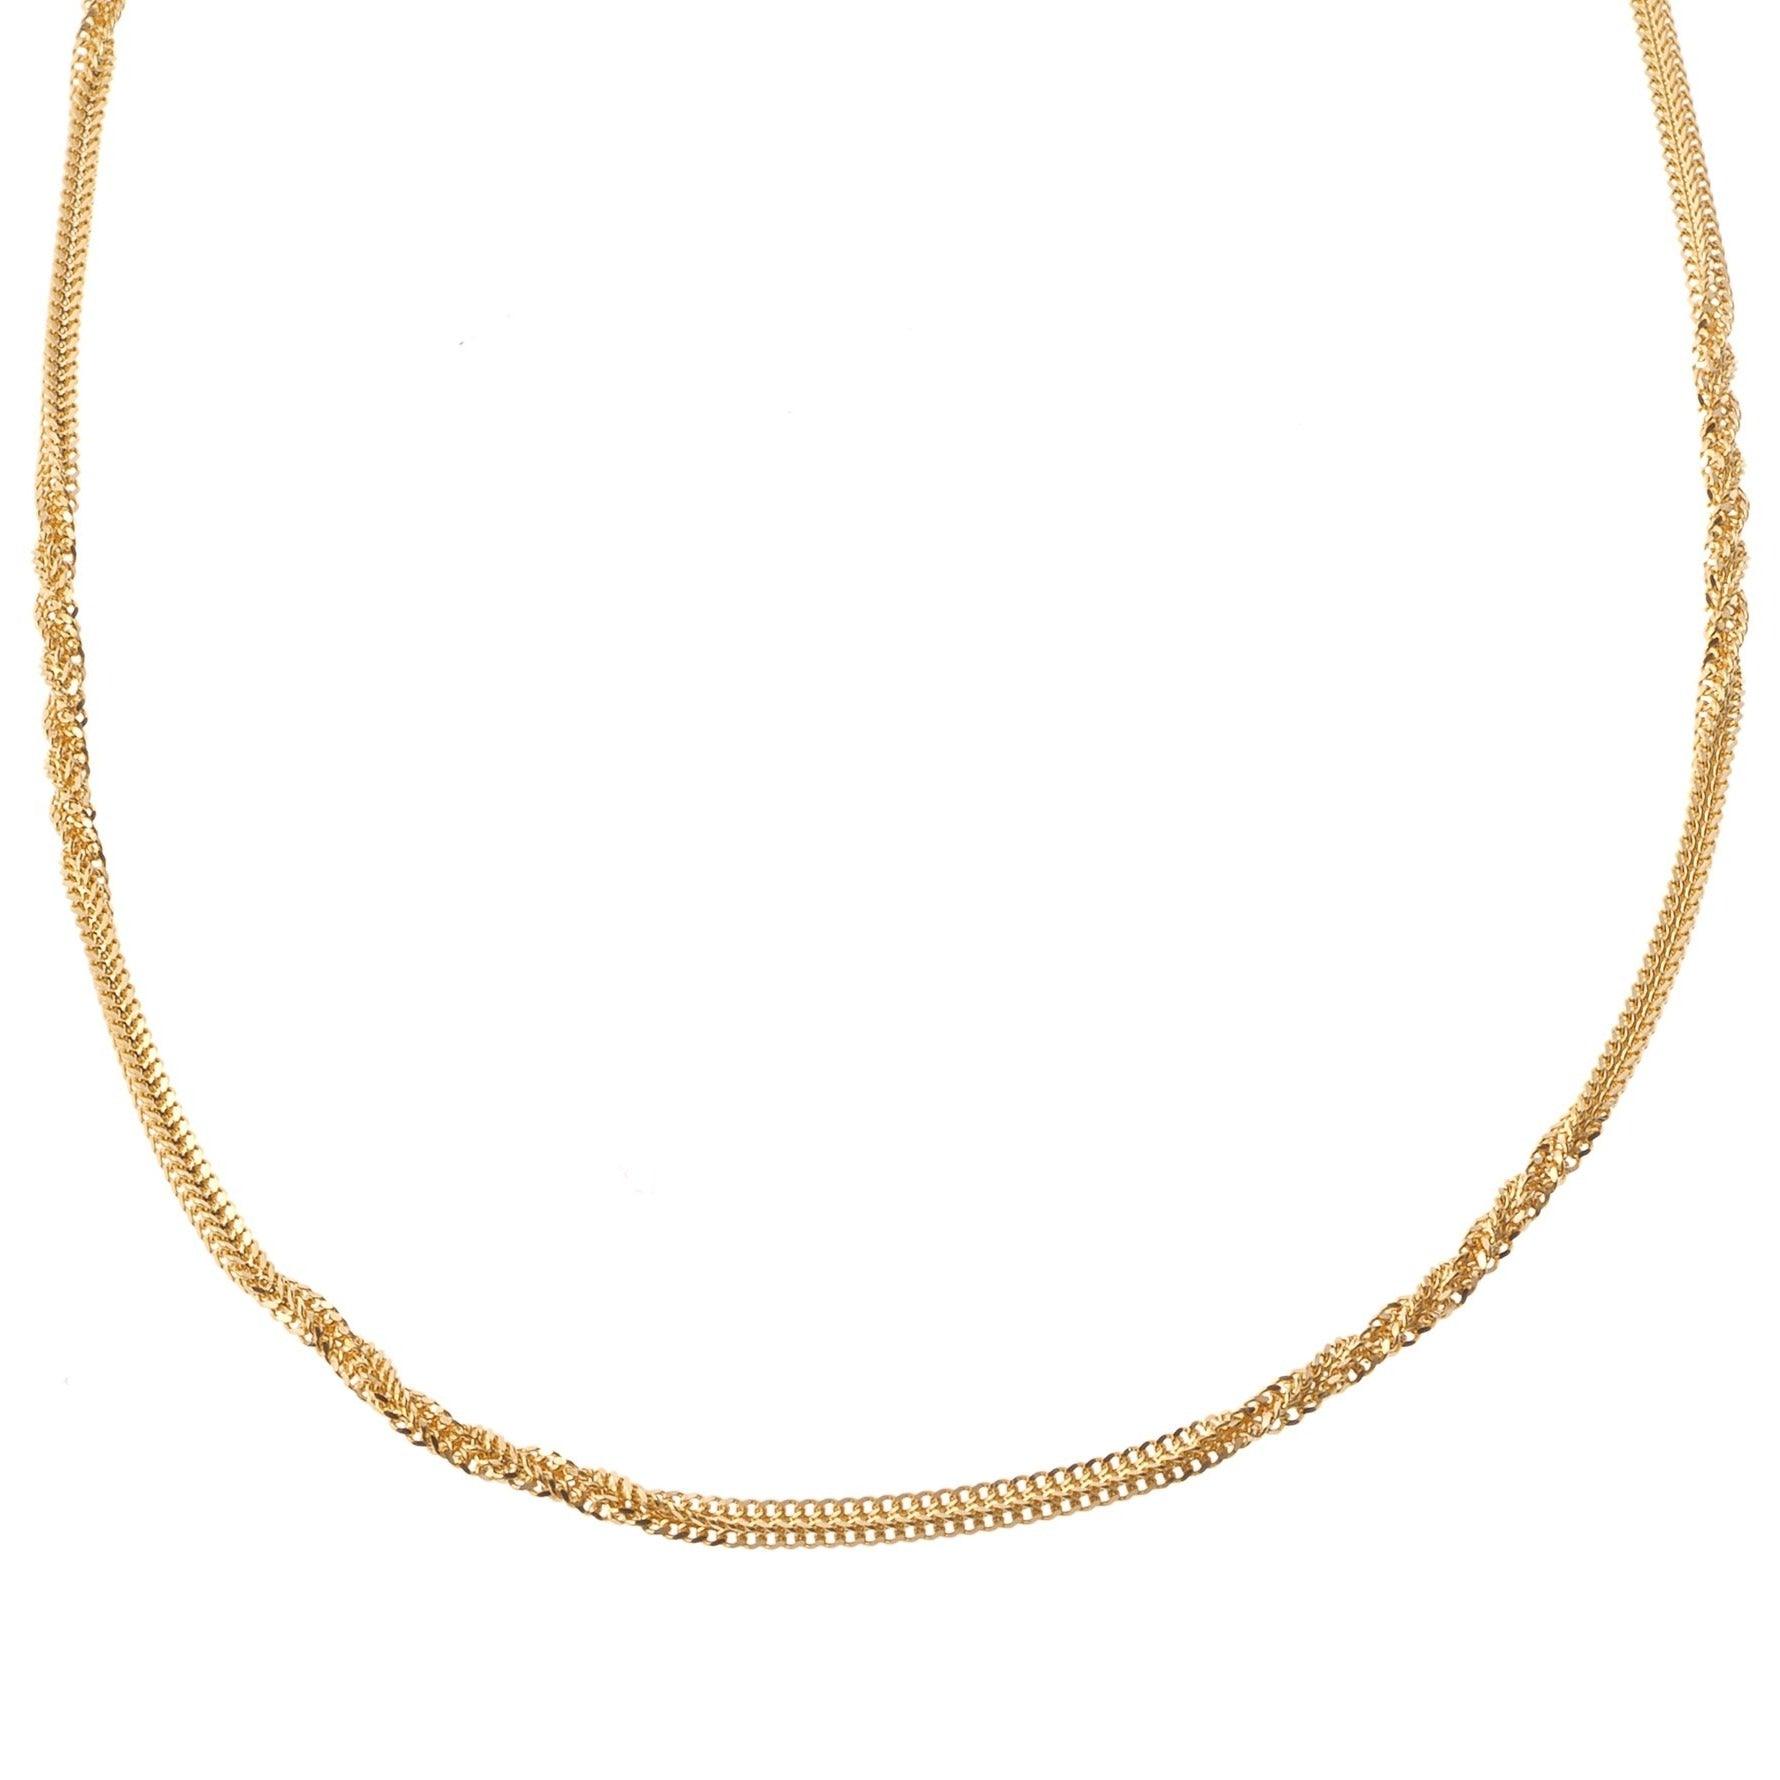 22ct Gold Chain with Twisted Design C-6222